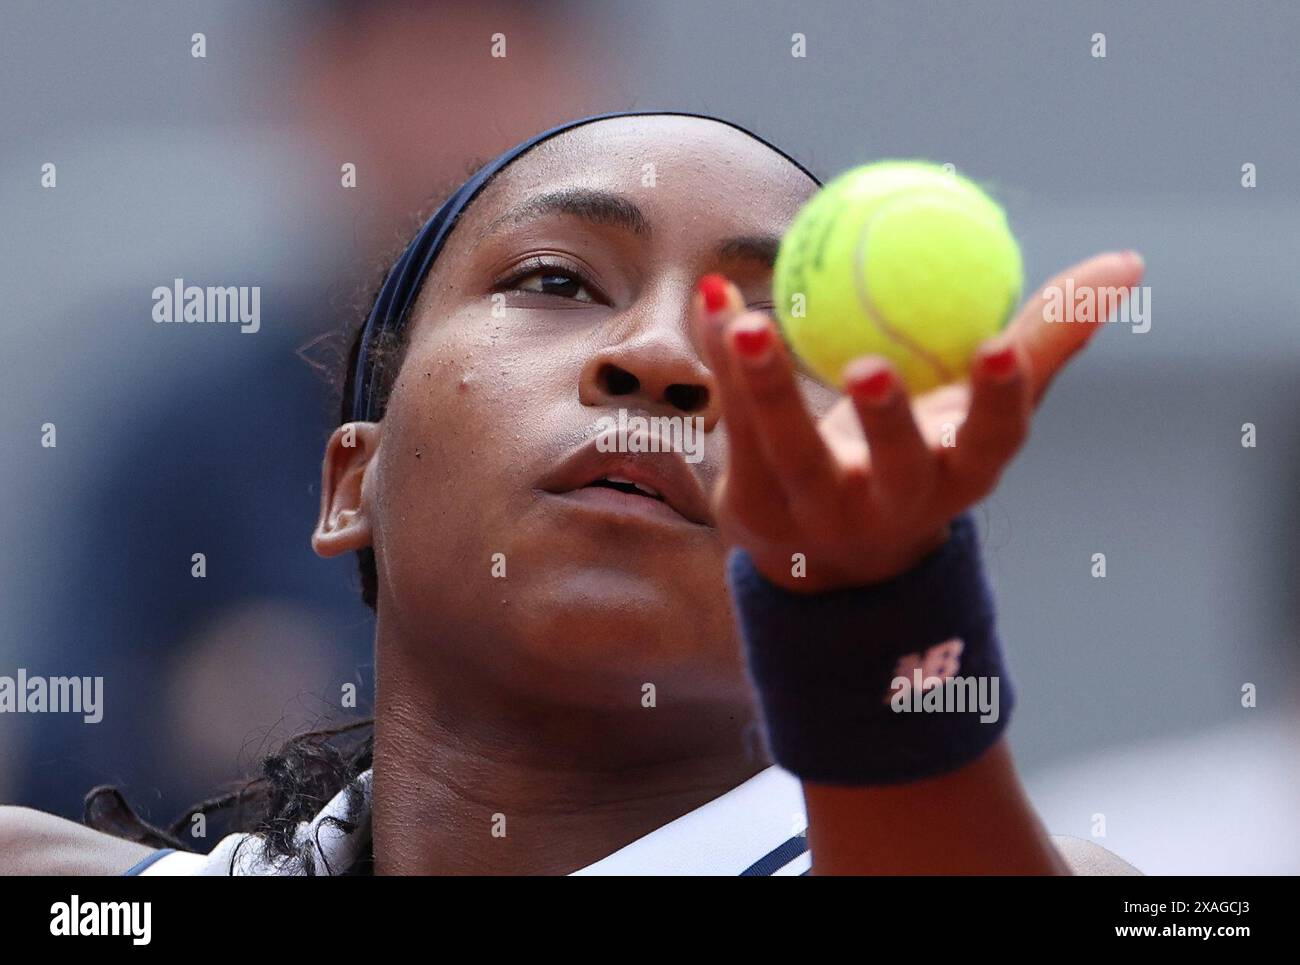 Paris, France. 6th June, 2024. Coco Gauff serves during the women's singles semifinal match between Coco Gauff of the United States and Iga Swiatek of Poland at the French Open tennis tournament at Roland Garros in Paris, France, on June 6, 2024. Credit: Gao Jing/Xinhua/Alamy Live News Stock Photo